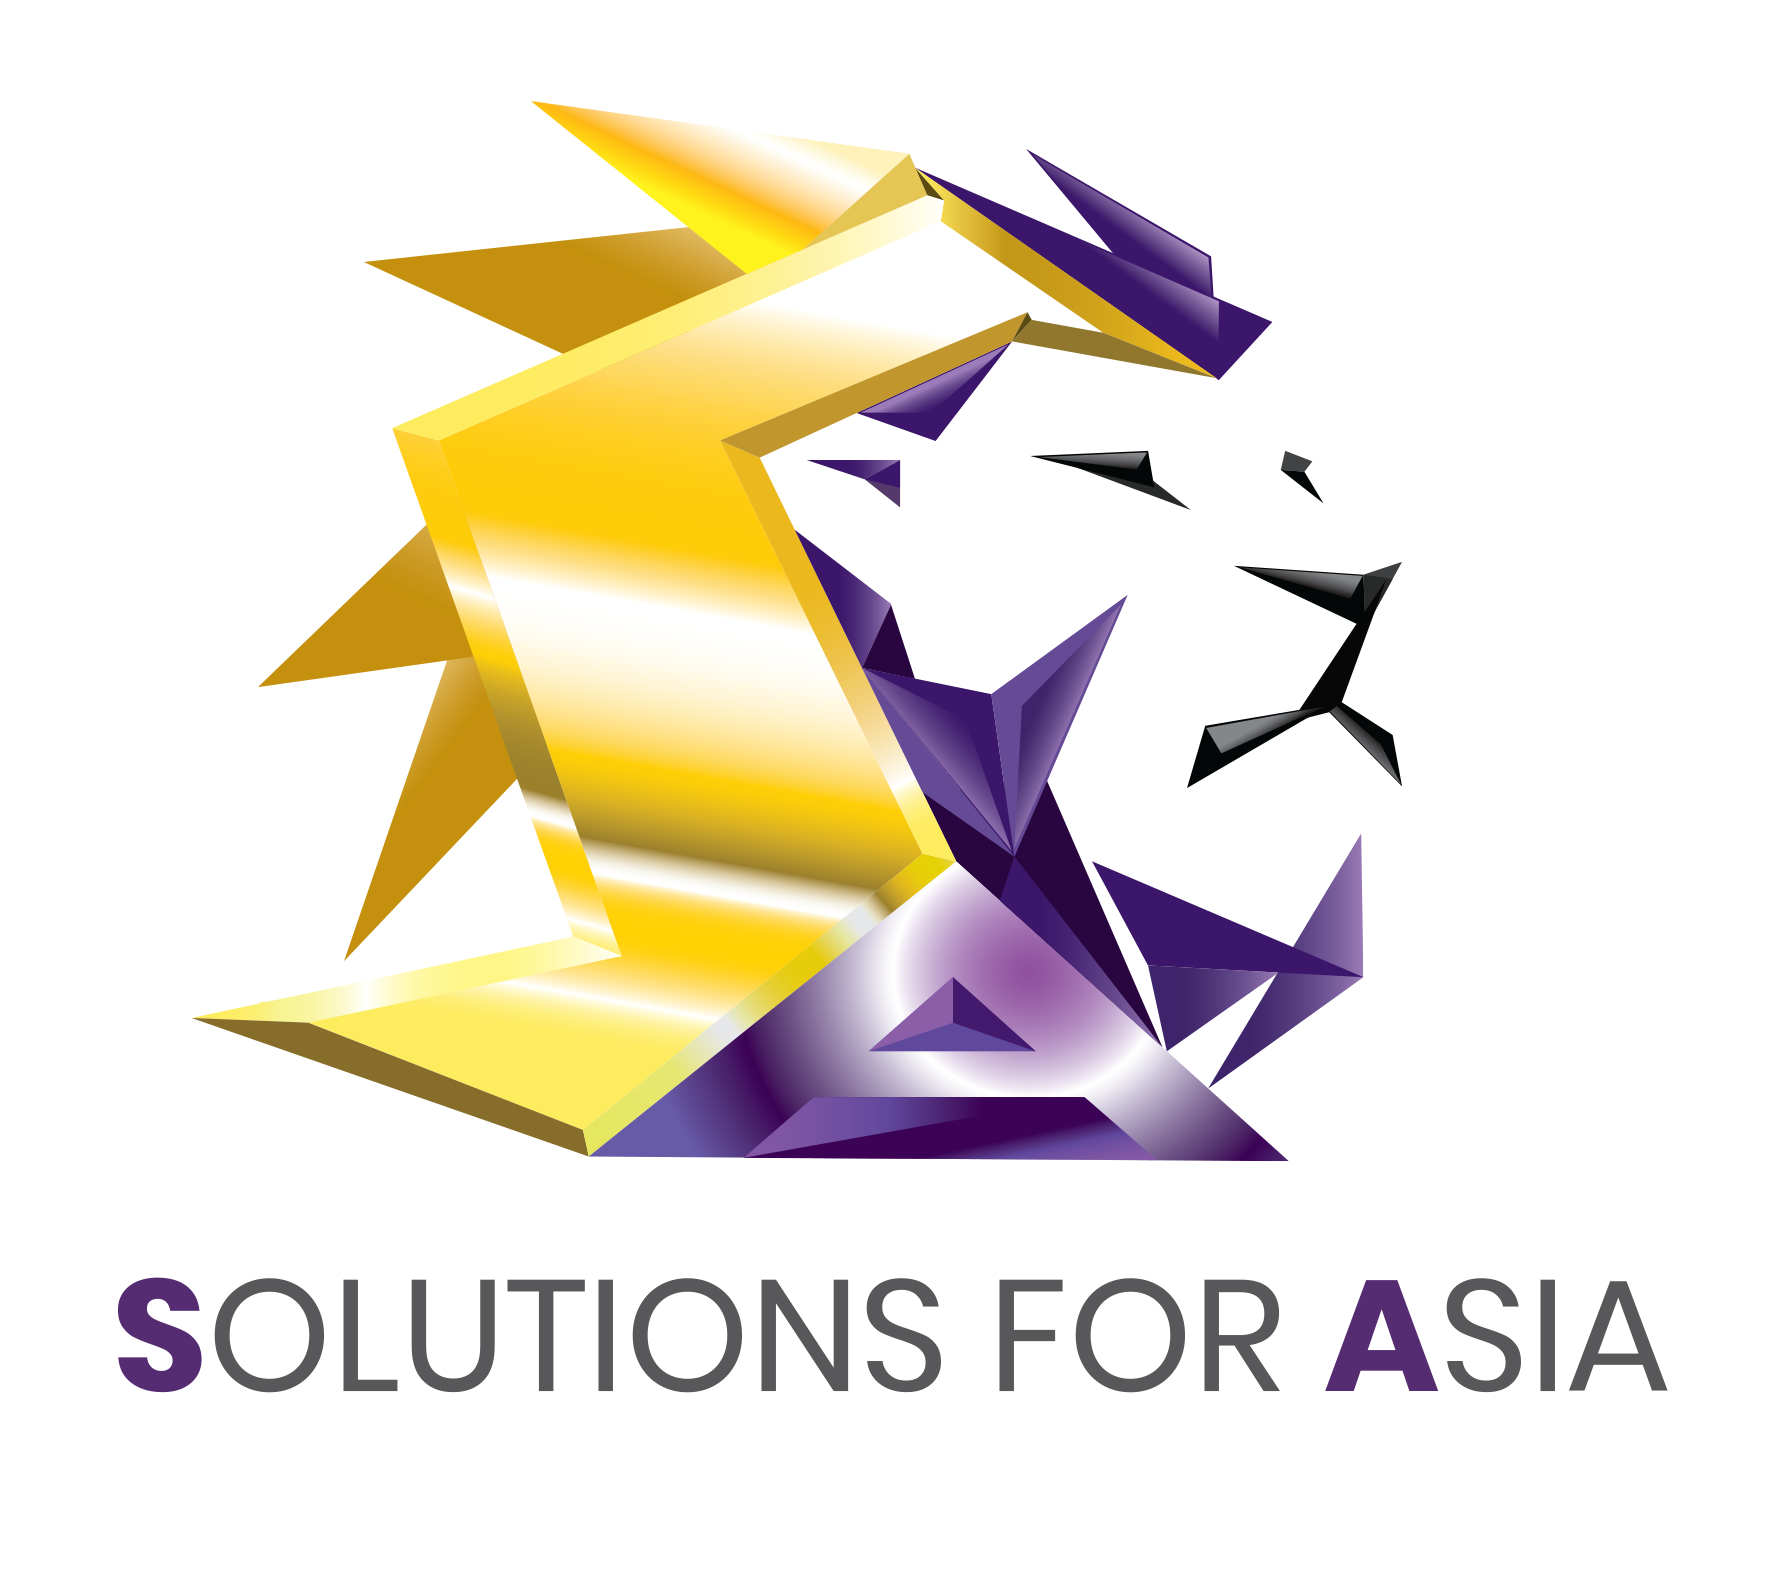 [Staging] Solutions for Asia